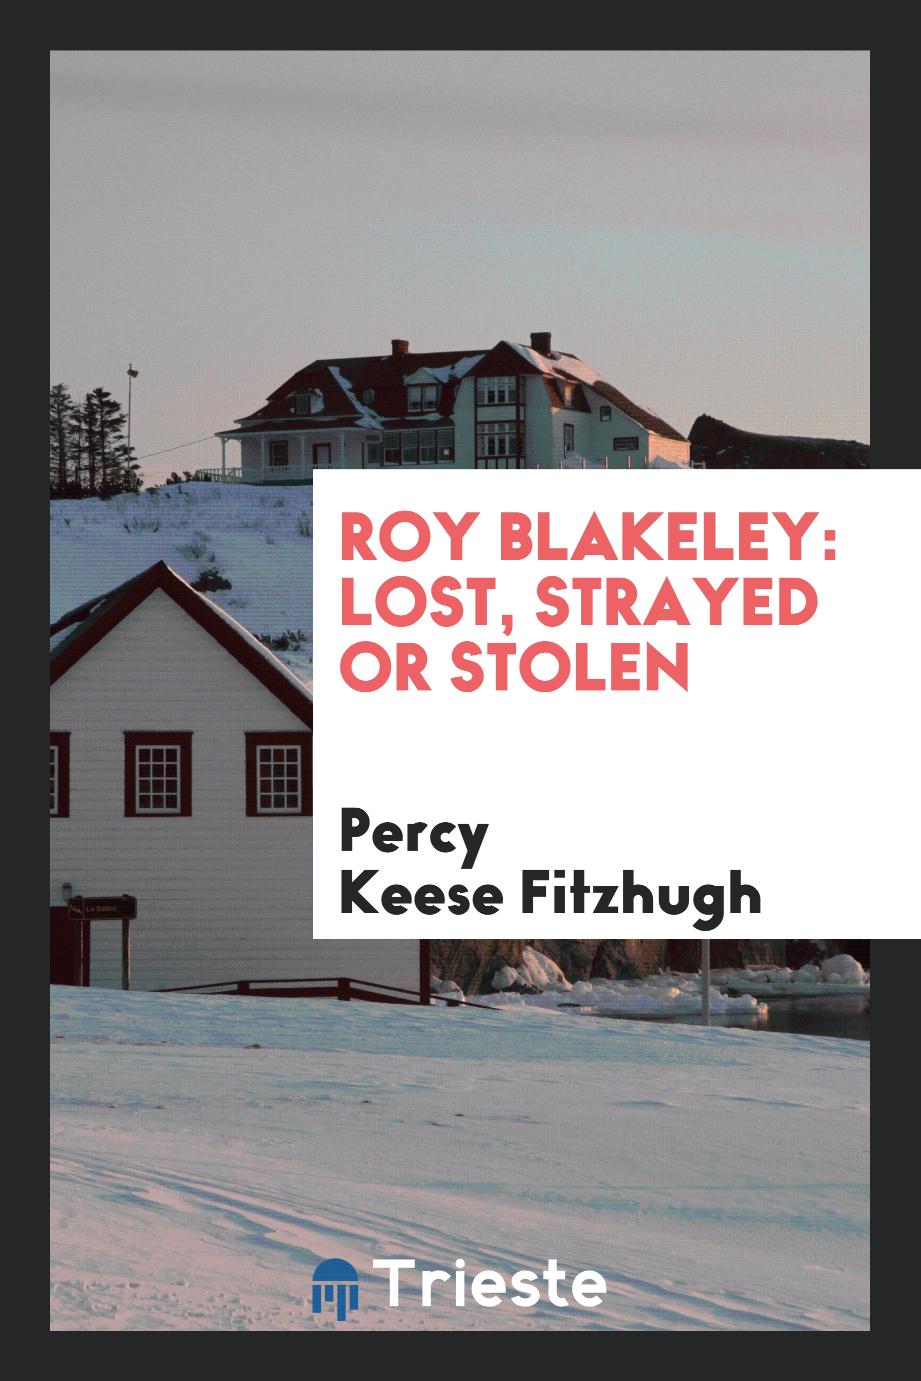 Roy Blakeley: lost, strayed or stolen